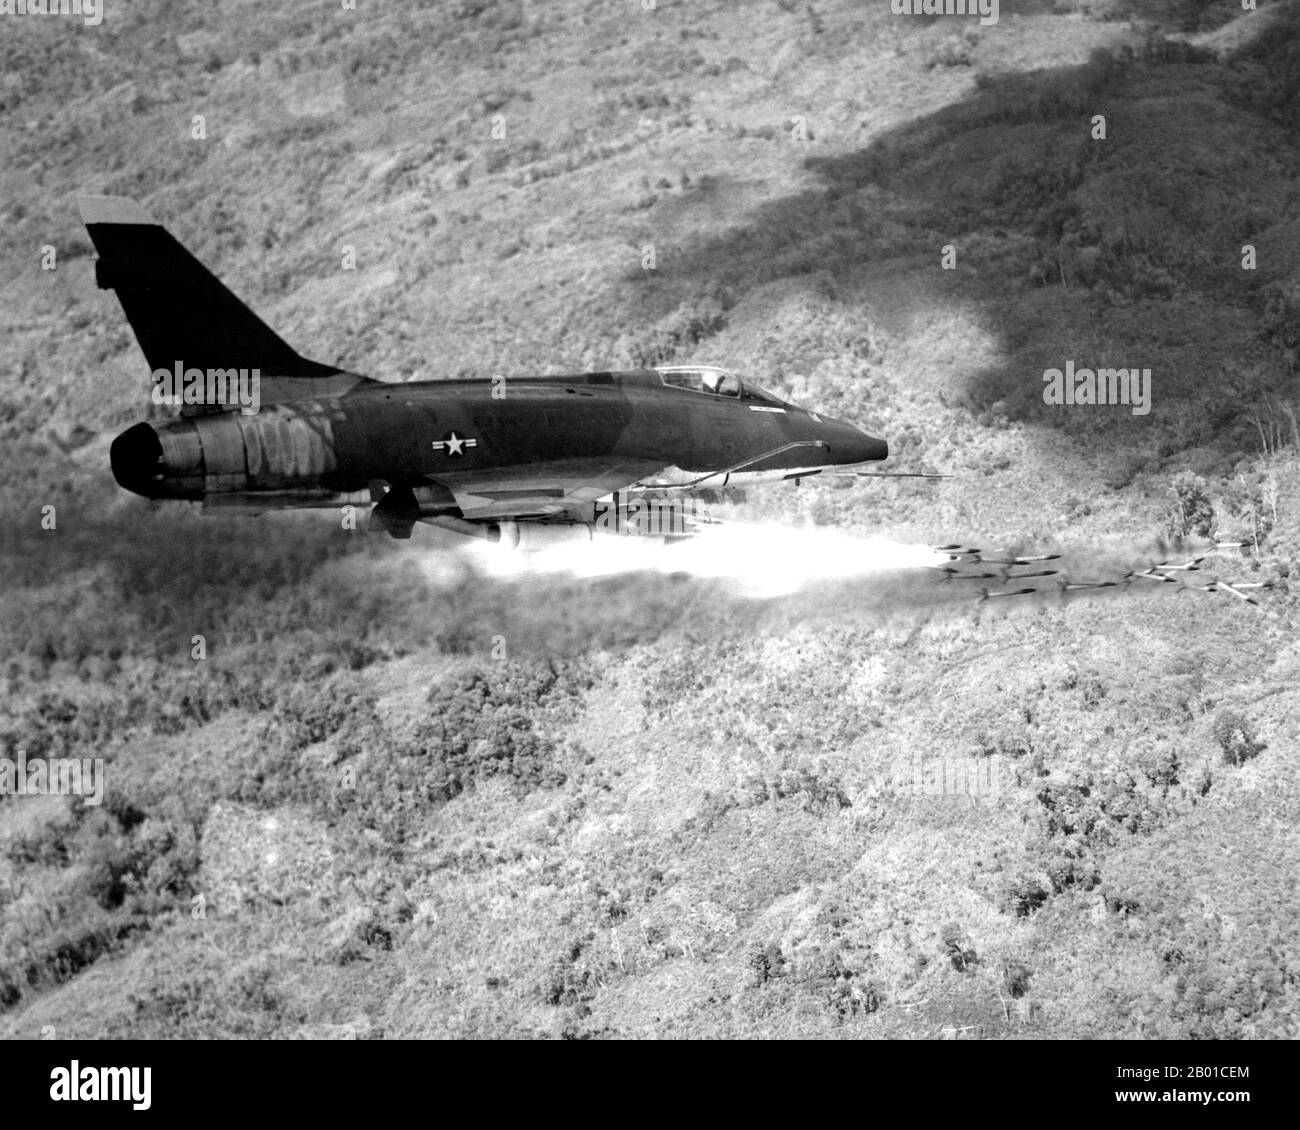 Vietnam: An Air Force F-100D Super Sabre aircraft fires a salvo of 2.75-inch rockets against an enemy position in South Vietnam, 1967.  The aircraft provided much of the tactical air support to Allied ground forces fighting in Vietnam.  The Second Indochina War, known in America as the Vietnam War, was a Cold War era military conflict that occurred in Vietnam, Laos, and Cambodia from 1 November 1955 to the fall of Saigon on 30 April 1975. This war followed the First Indochina War and was fought between North Vietnam, supported by its communist allies, and the government of South Vietnam. Stock Photo